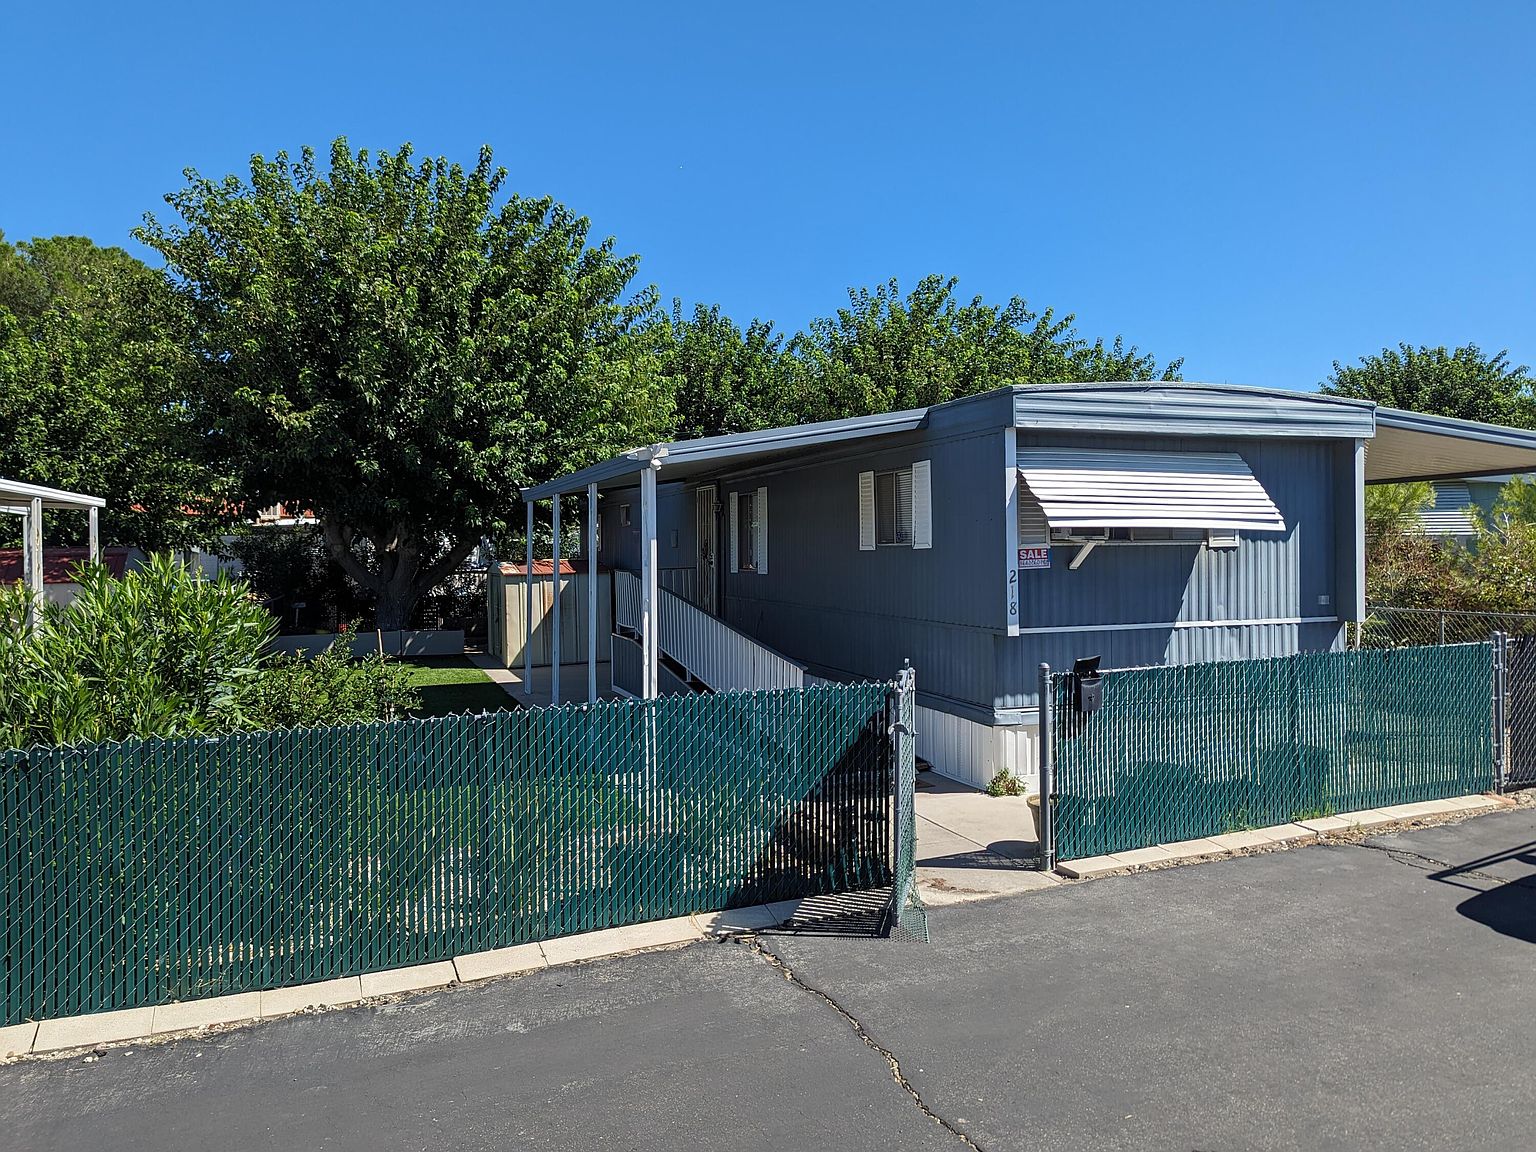 37311 47th St E SPACE 218, Palmdale, CA 93552 | MLS #23006001 | Zillow